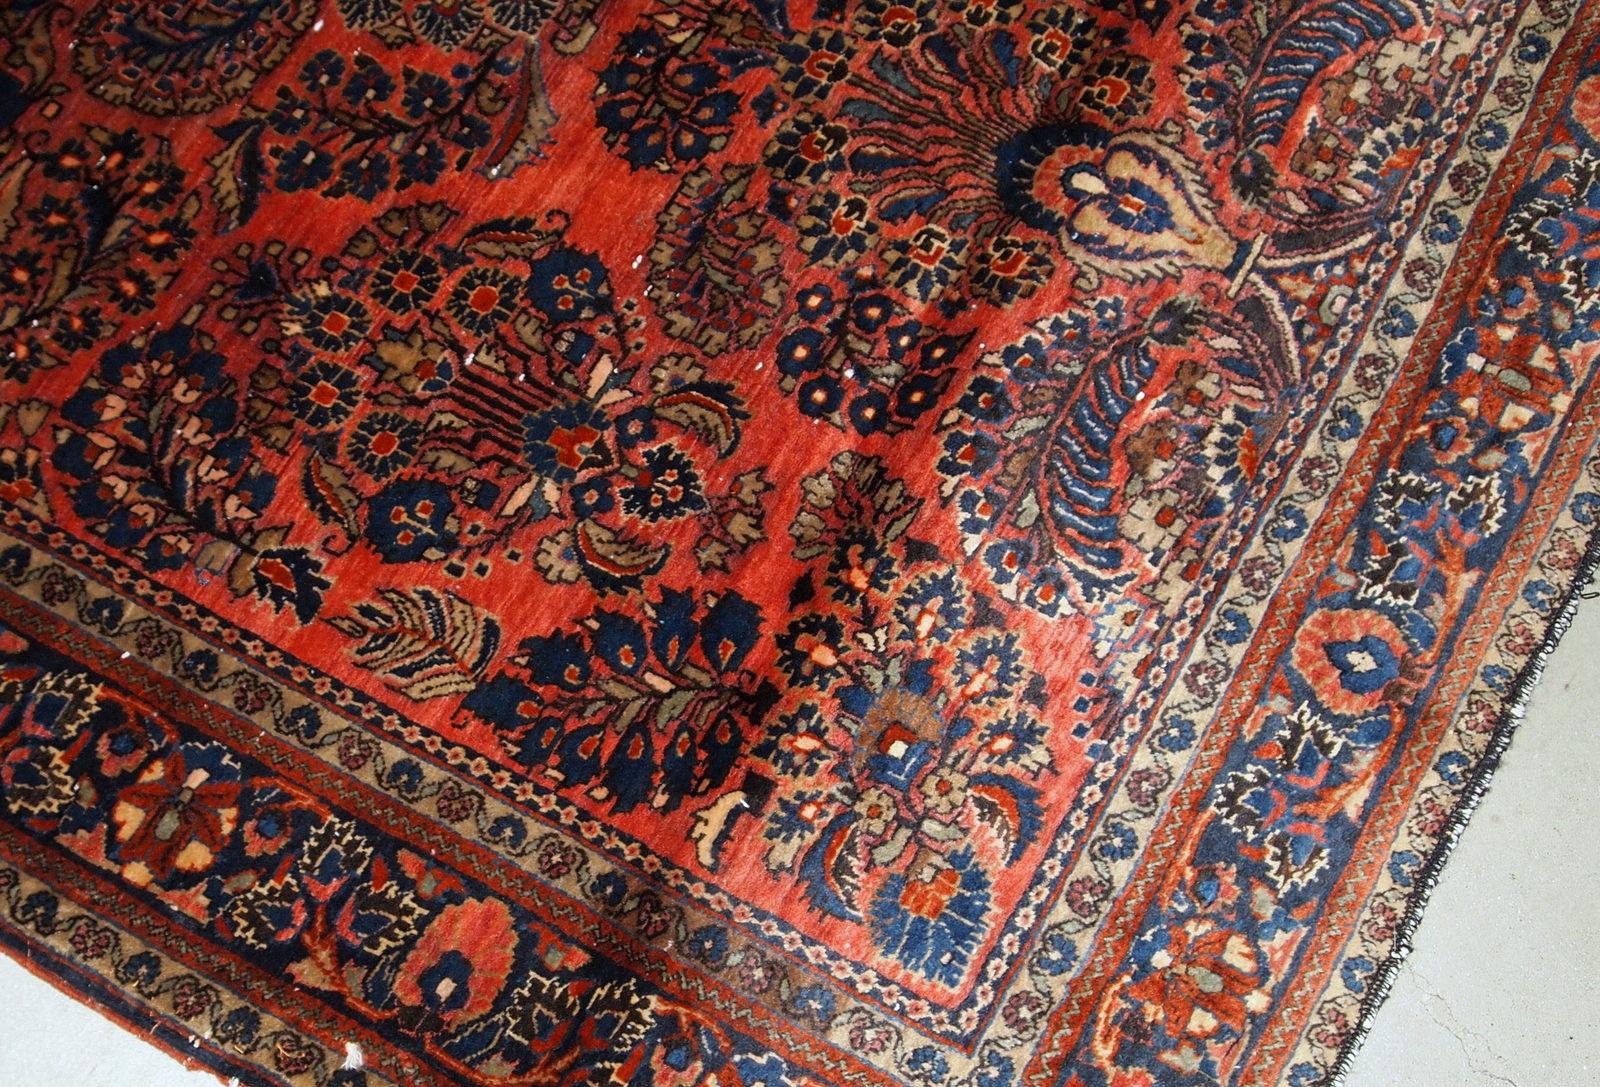 Handmade antique Sarouk rug in original good condition. The rug has been made in the beginning of 20th century in red wool.

?-Condition: original good,

-circa: 1920s,

-Size: 4' x 6.4' (122 cm x 195 cm),

-Material: wool,

-Country of